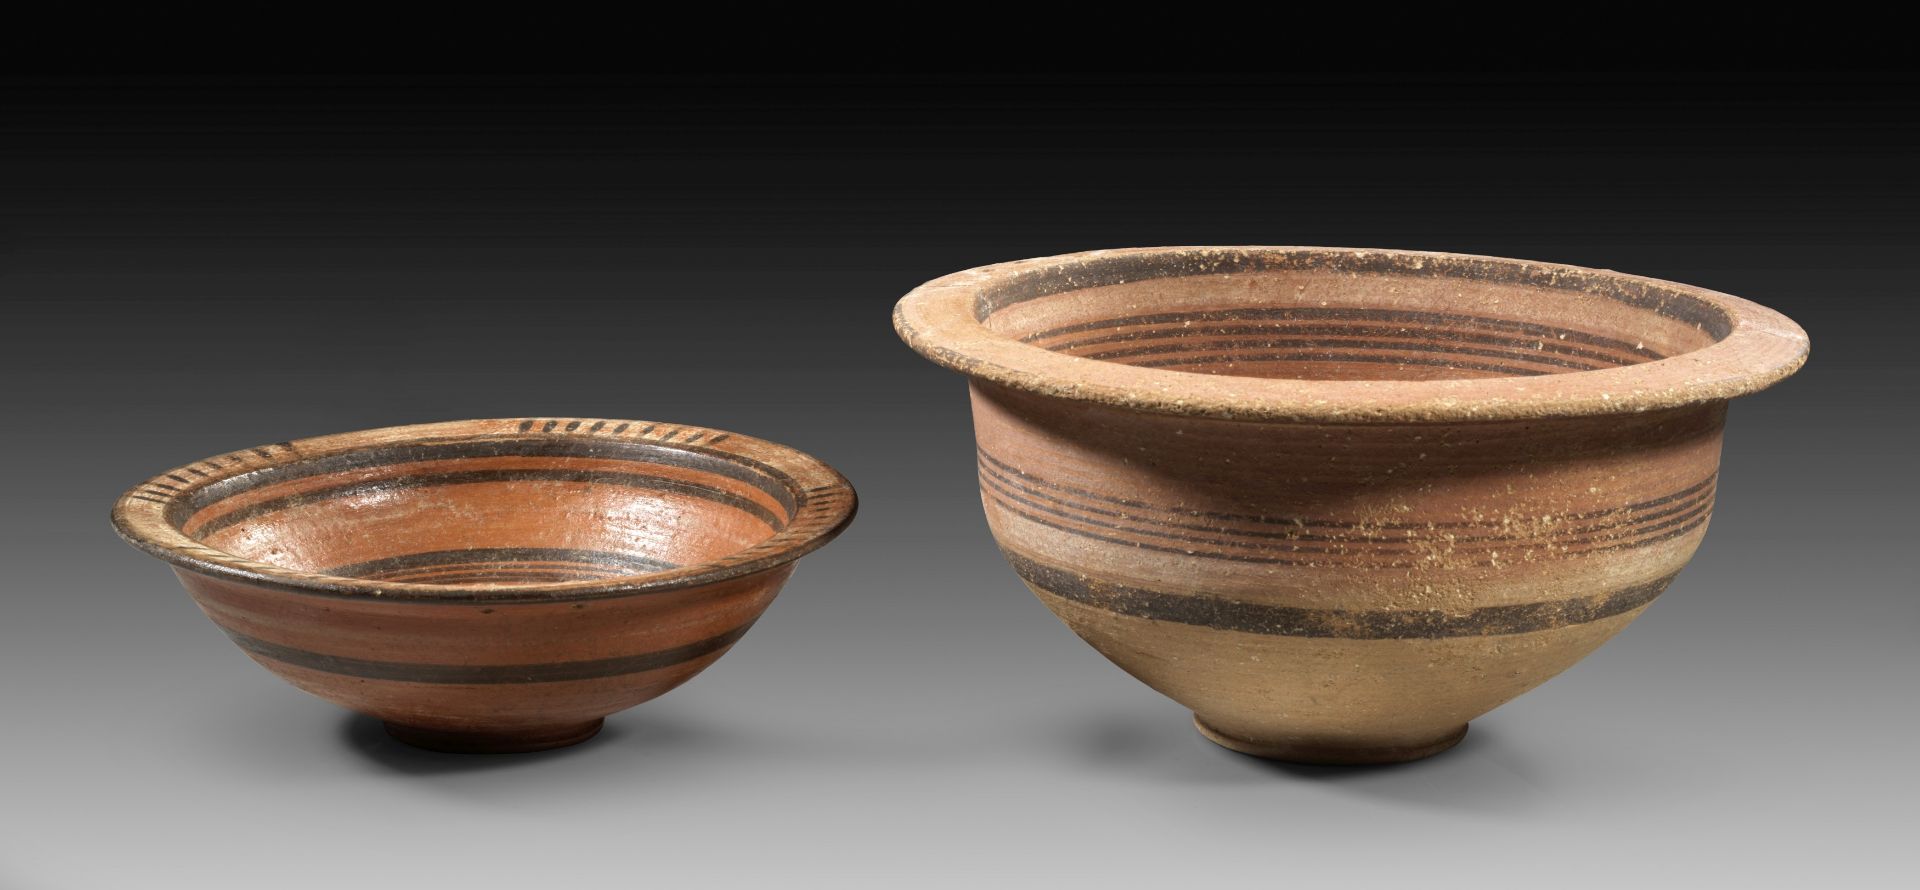 Two Eastern Mediterranean bowls of the Bichrome Red Ware.